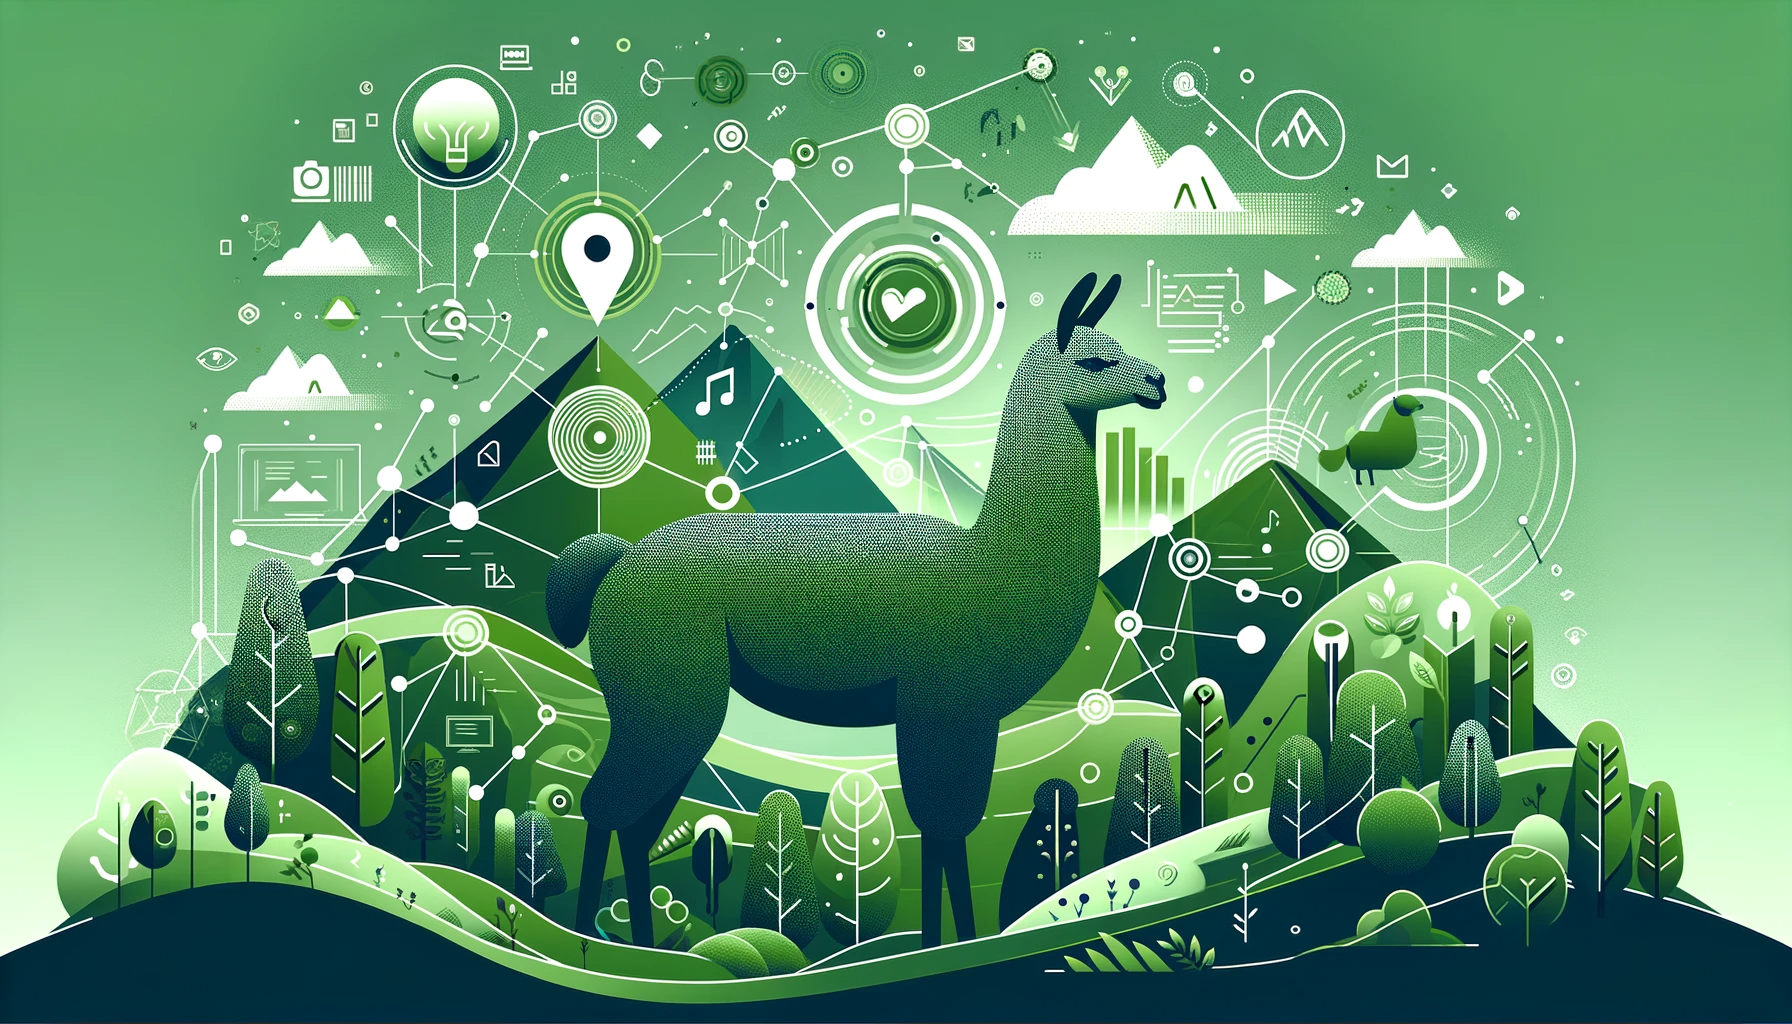 Leaping Llamas by DDSN is a rich starting point for entico Xperience and Xperience by Kentico